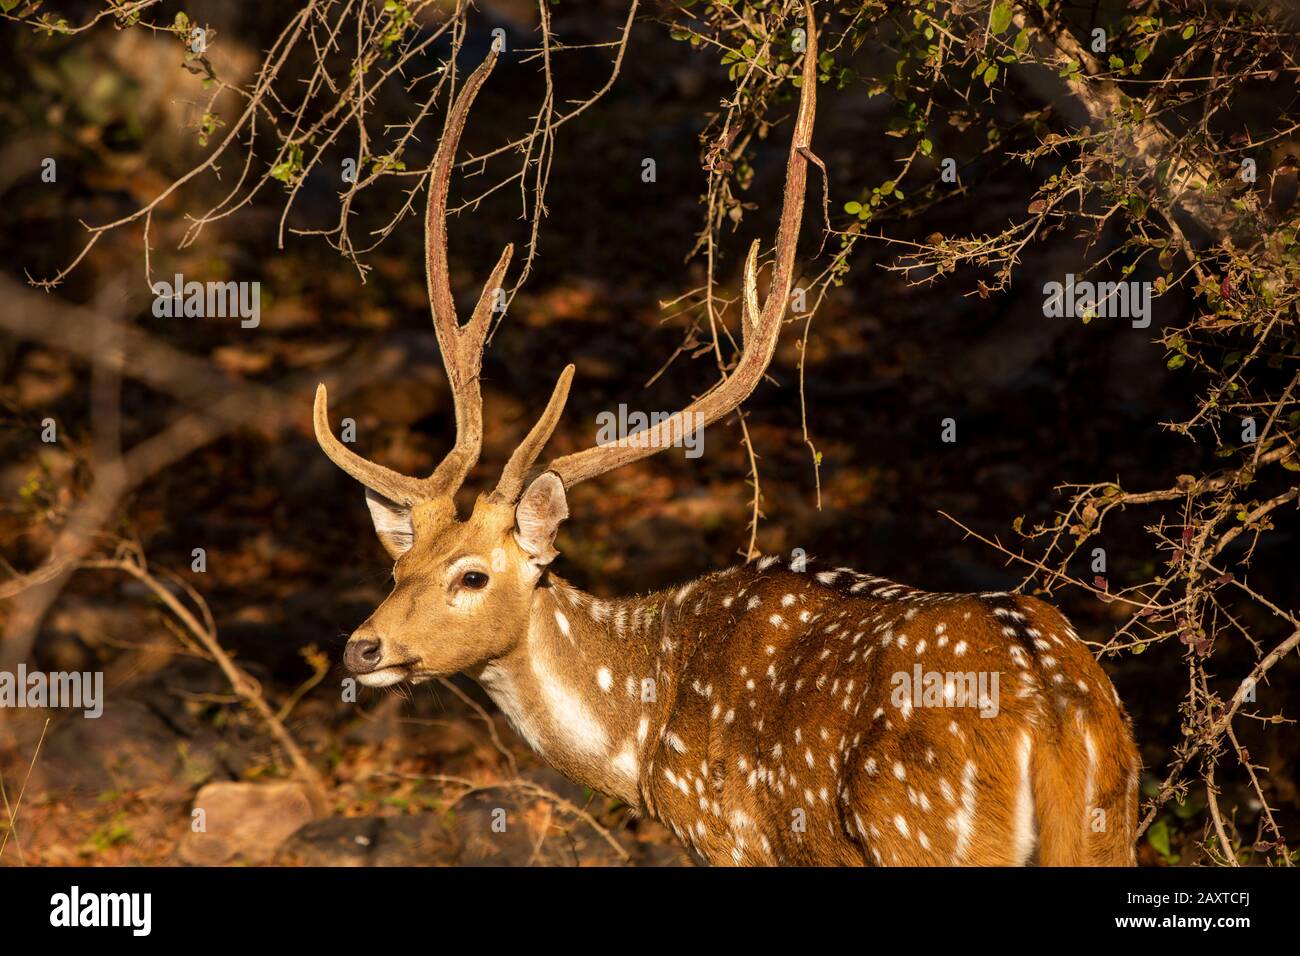 India, Rajasthan, Ranthambhore, National Park, Zone 1, male chital, Axis axis also known as spotted deer Stock Photo